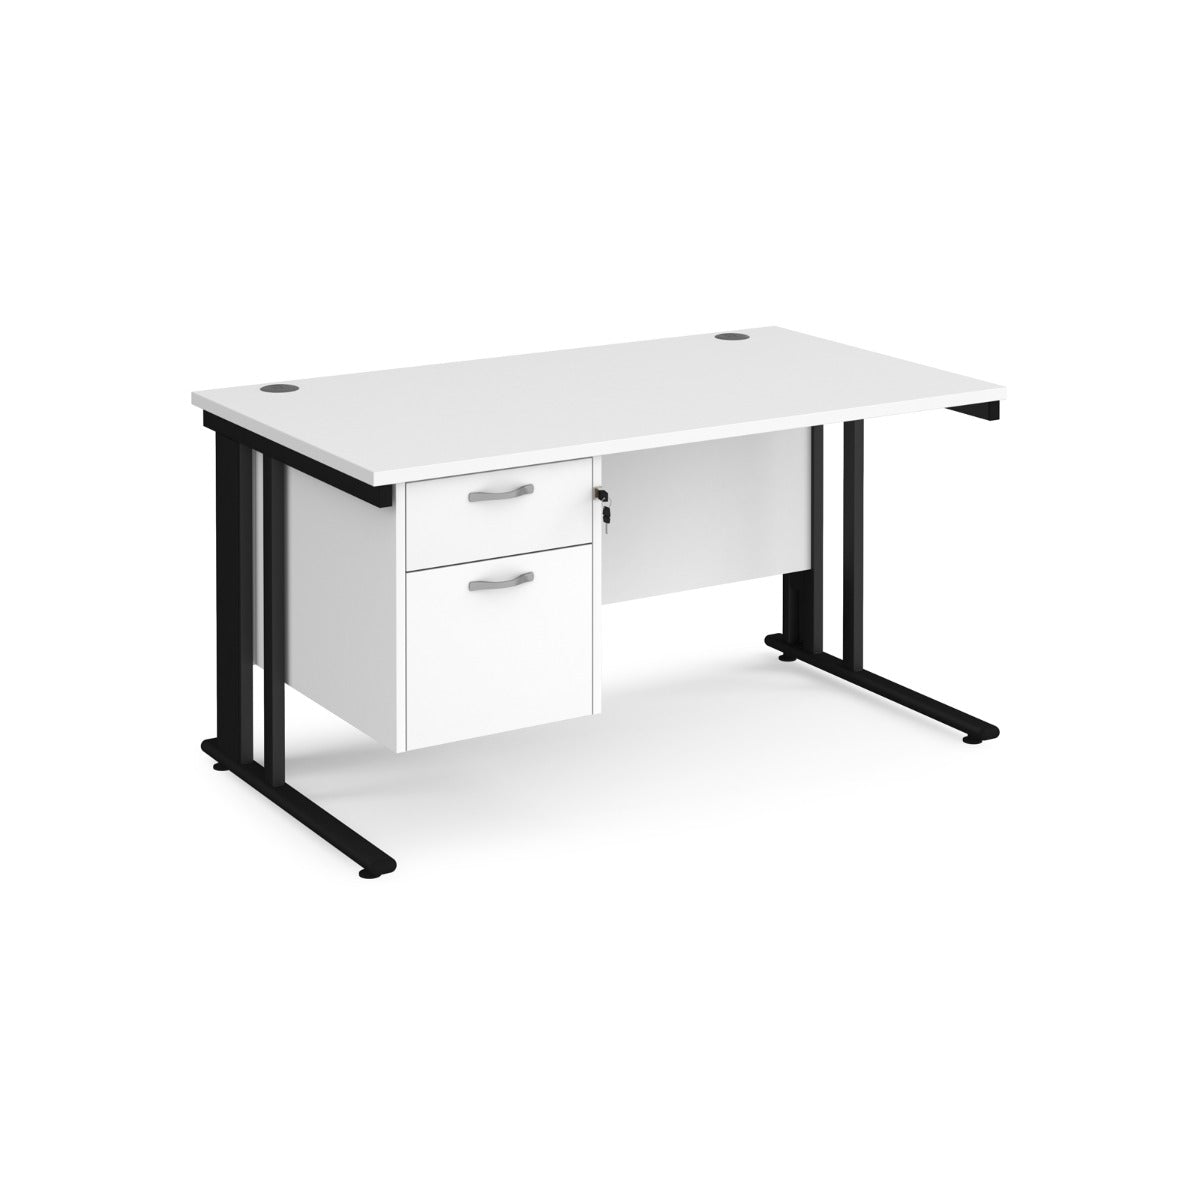 Maestro 800mm Deep Straight Cable Management Leg Office Desk with Two Drawer Pedestal